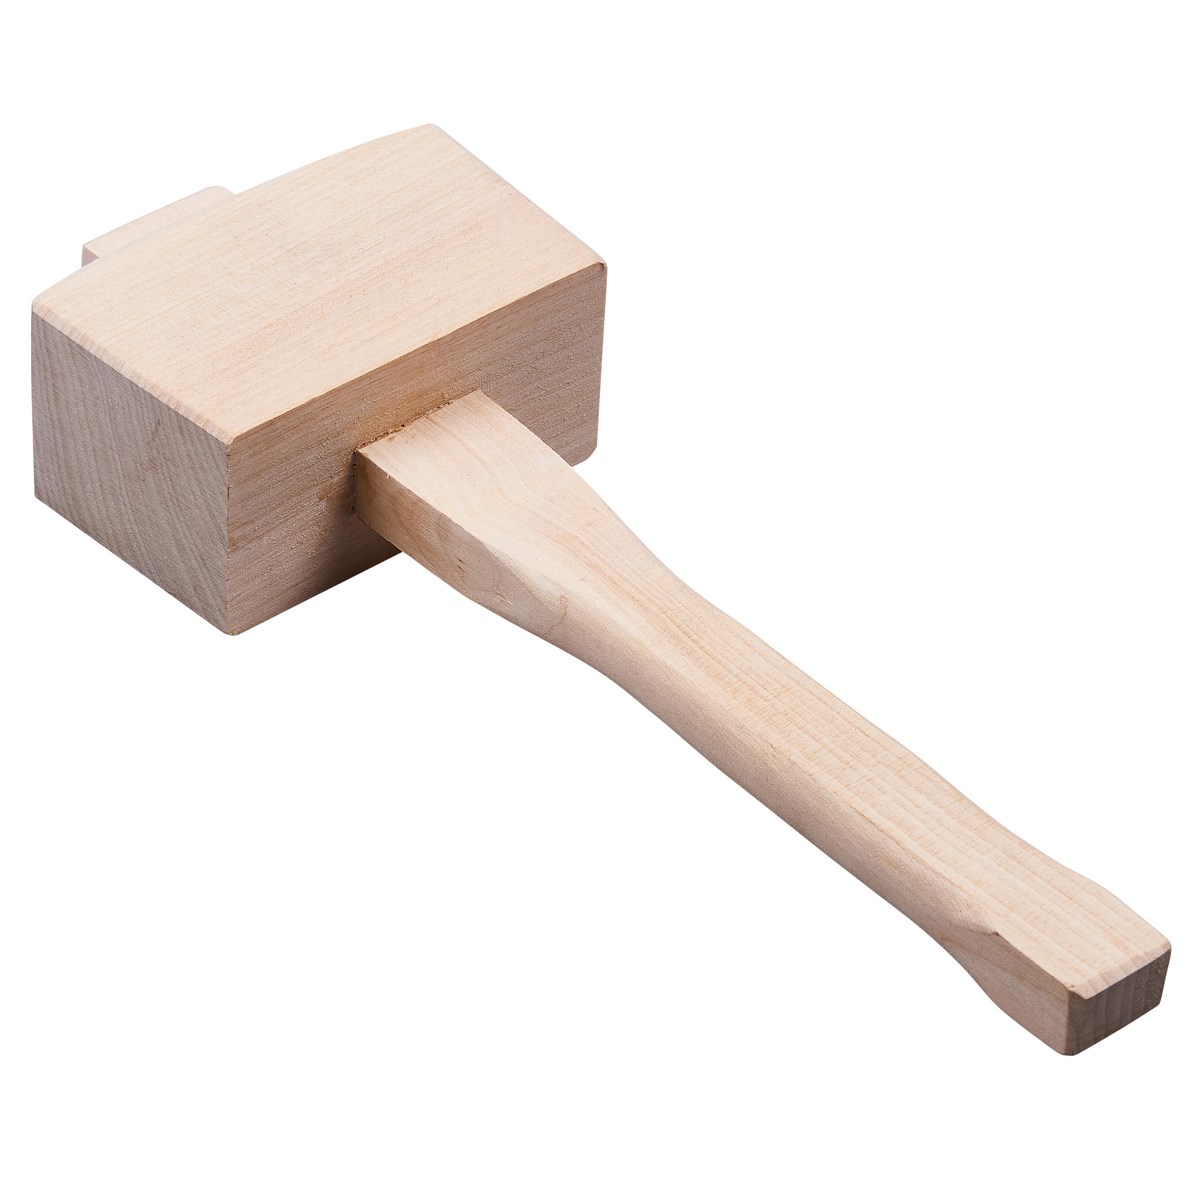 115mm Wooden Mallet Wood Carpentry Woodworking Hobby 